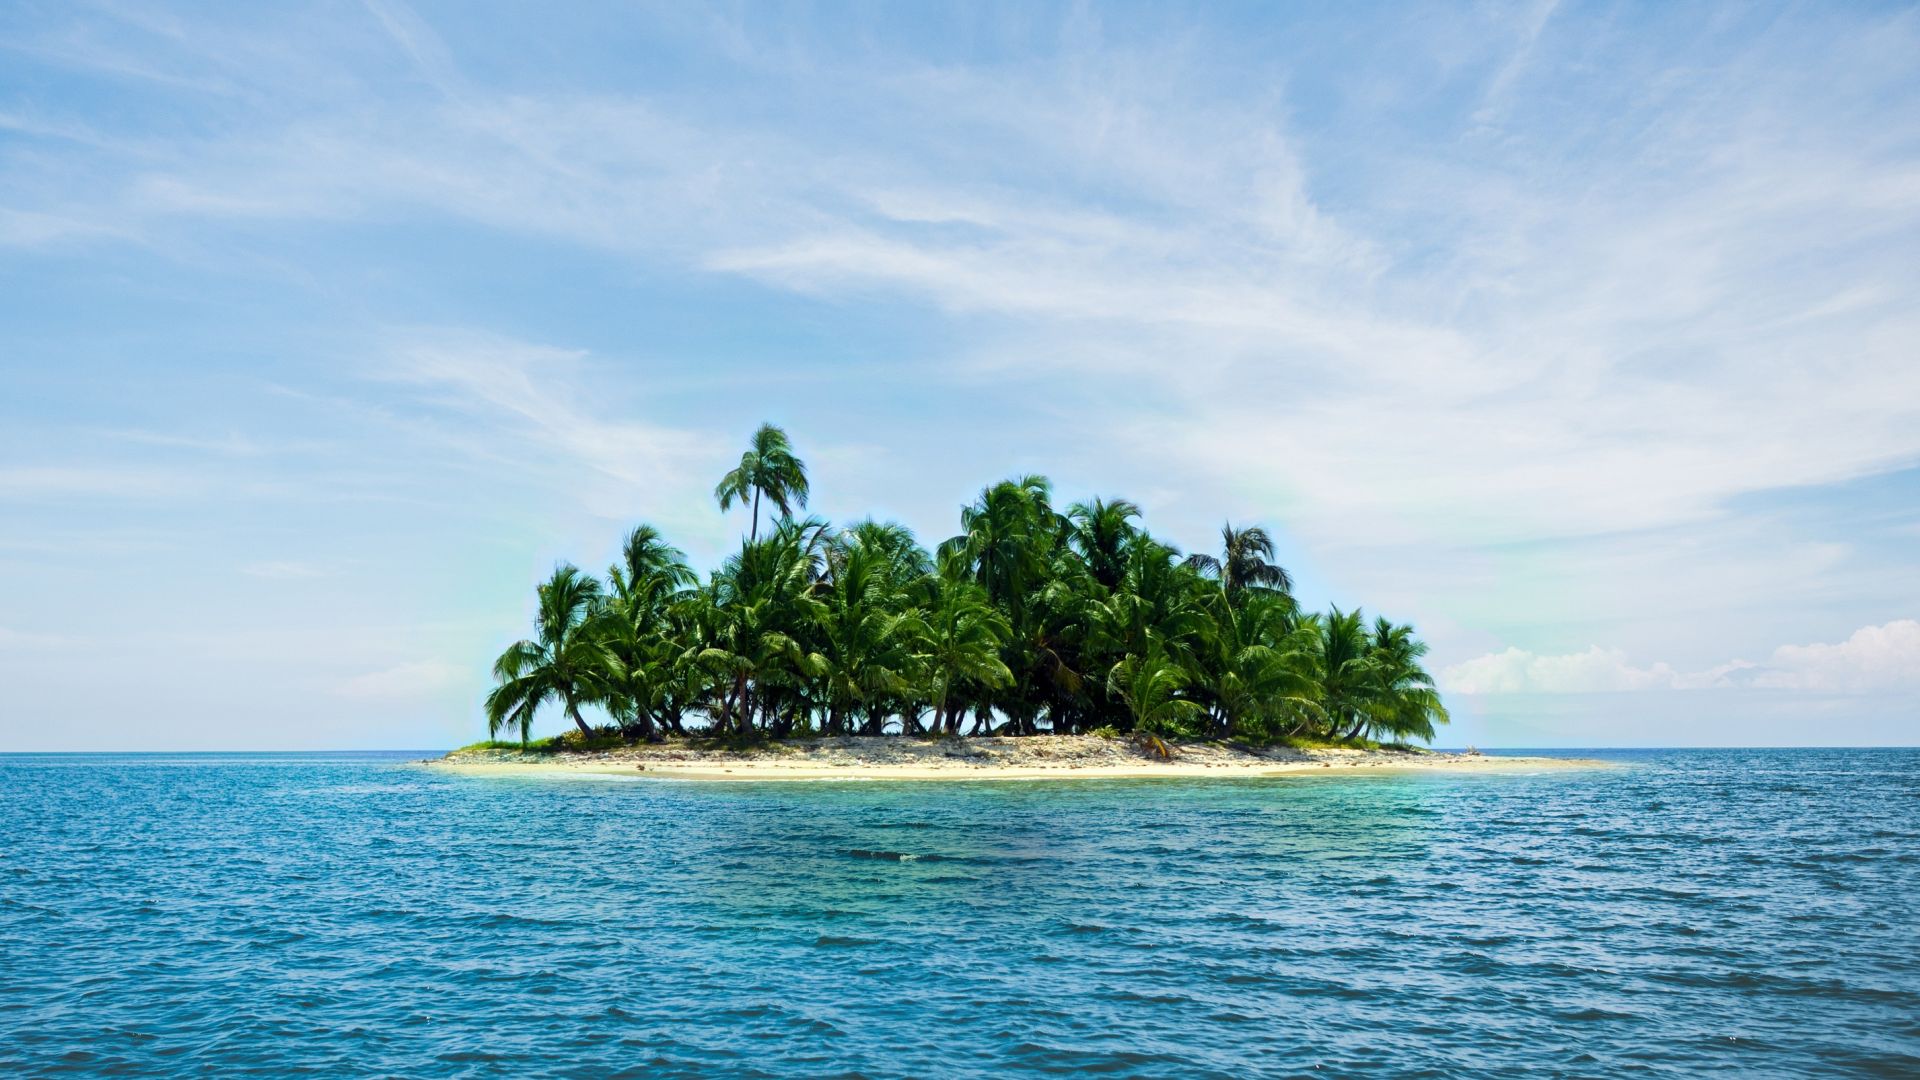 Desktop Wallpaper Caribbean Island, Holiday, Summer, Sea, Palm Tree, HD Image, Picture, Background, 064be9